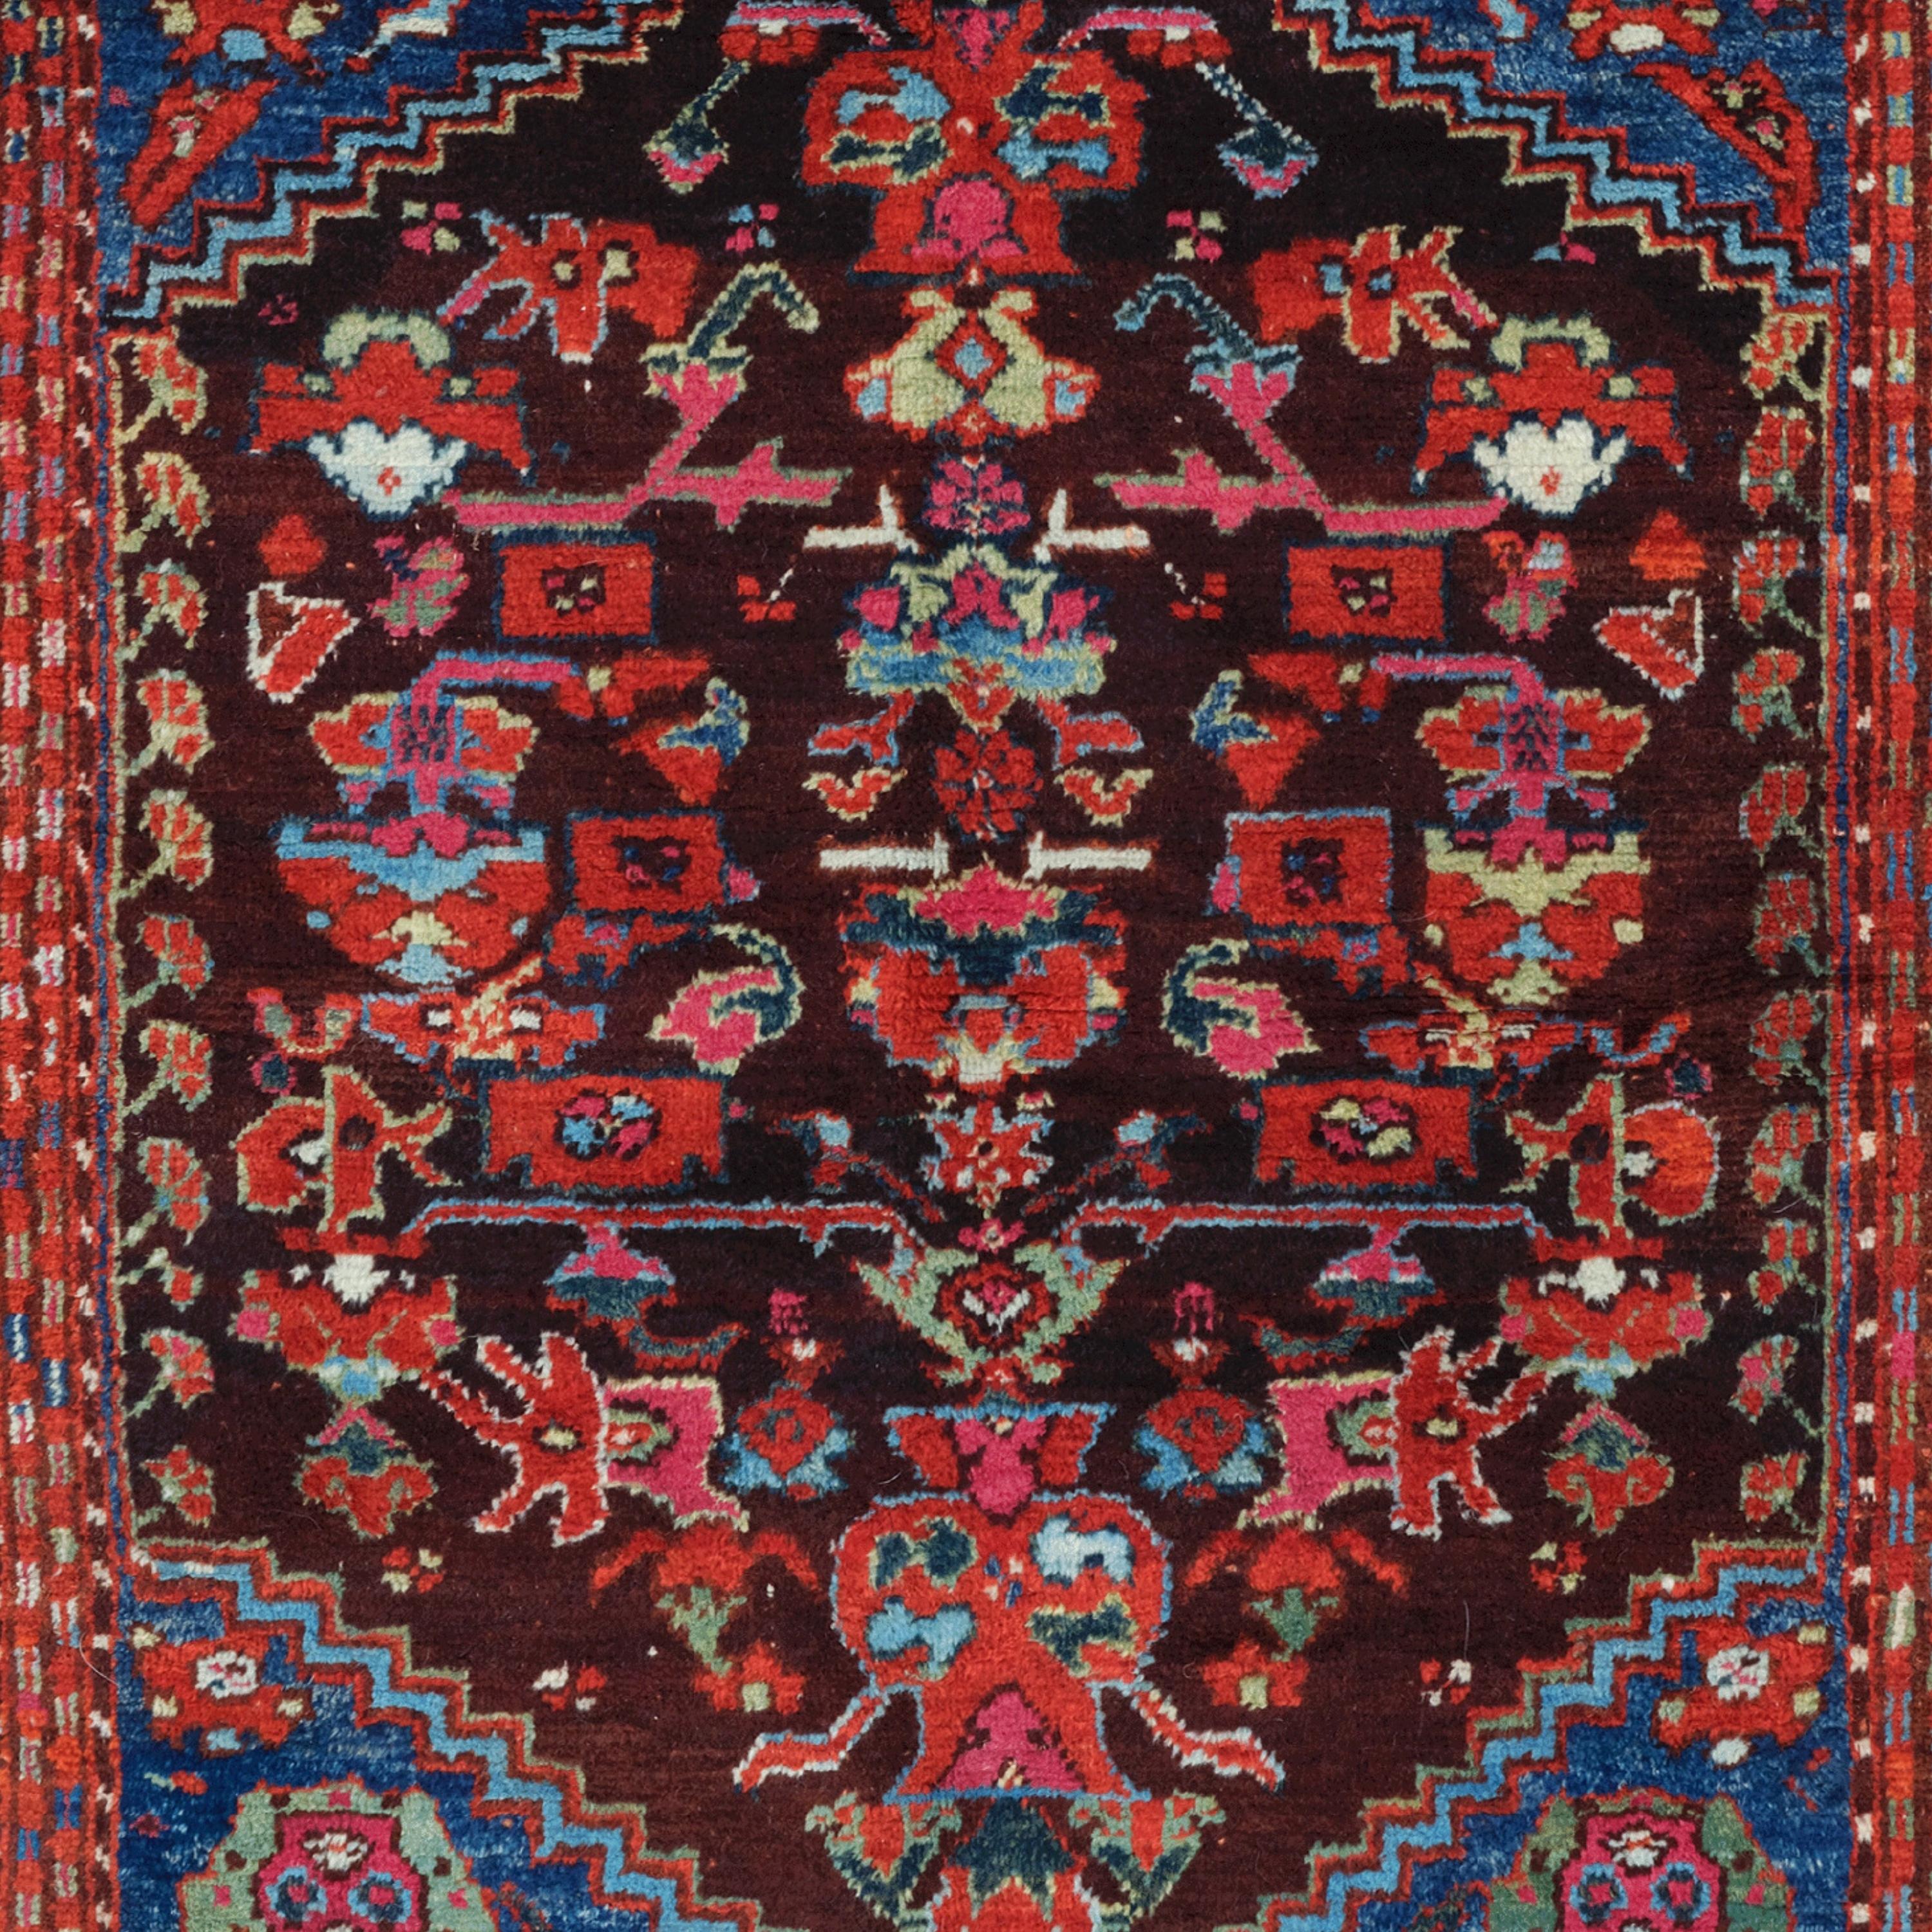 Middle Of The 19th Century Anatolian Kula Rug - Antique Turkish Rug In Good Condition For Sale In Sultanahmet, 34